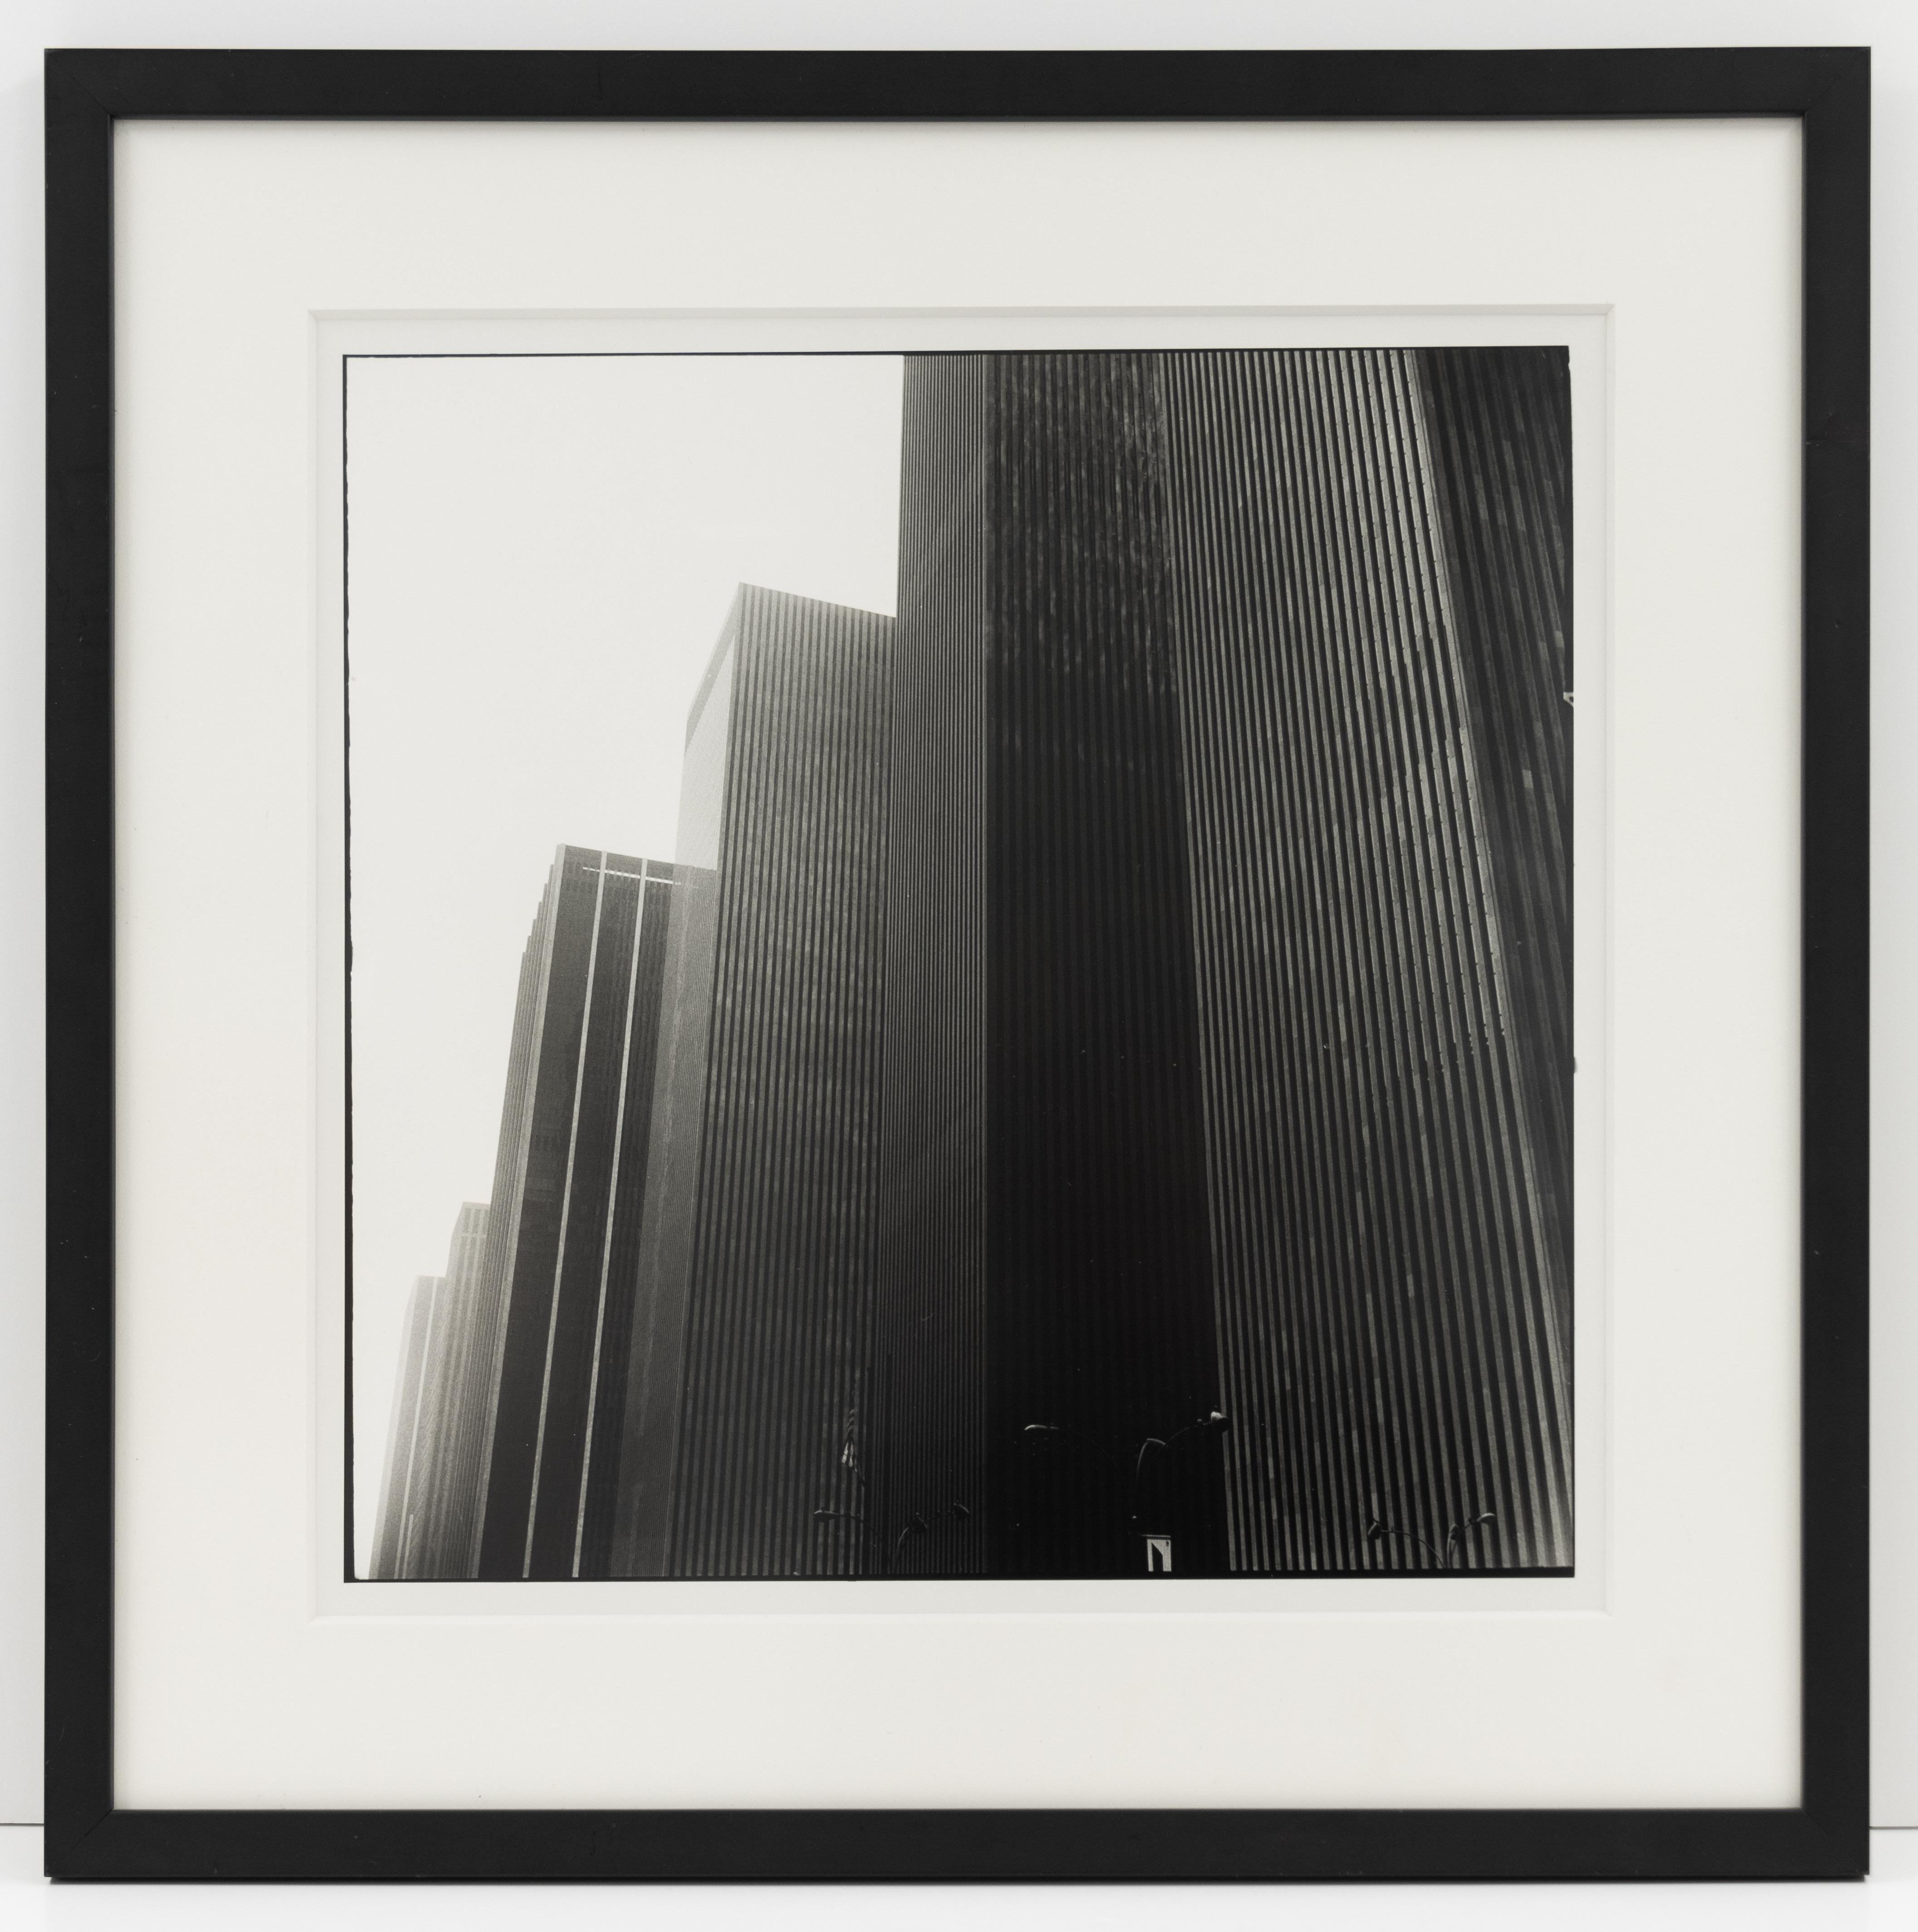 This black and white photograph by Peter Hujar is offered by CLAMP in New York City.

New York: Sixth Avenue
1976

Signed in ink, verso

Gelatin silver print

20 x 16 inches (50.8 x 40.6 cm), sheet
14.75 x 14.75 inches (37.5 x 37.5 cm),